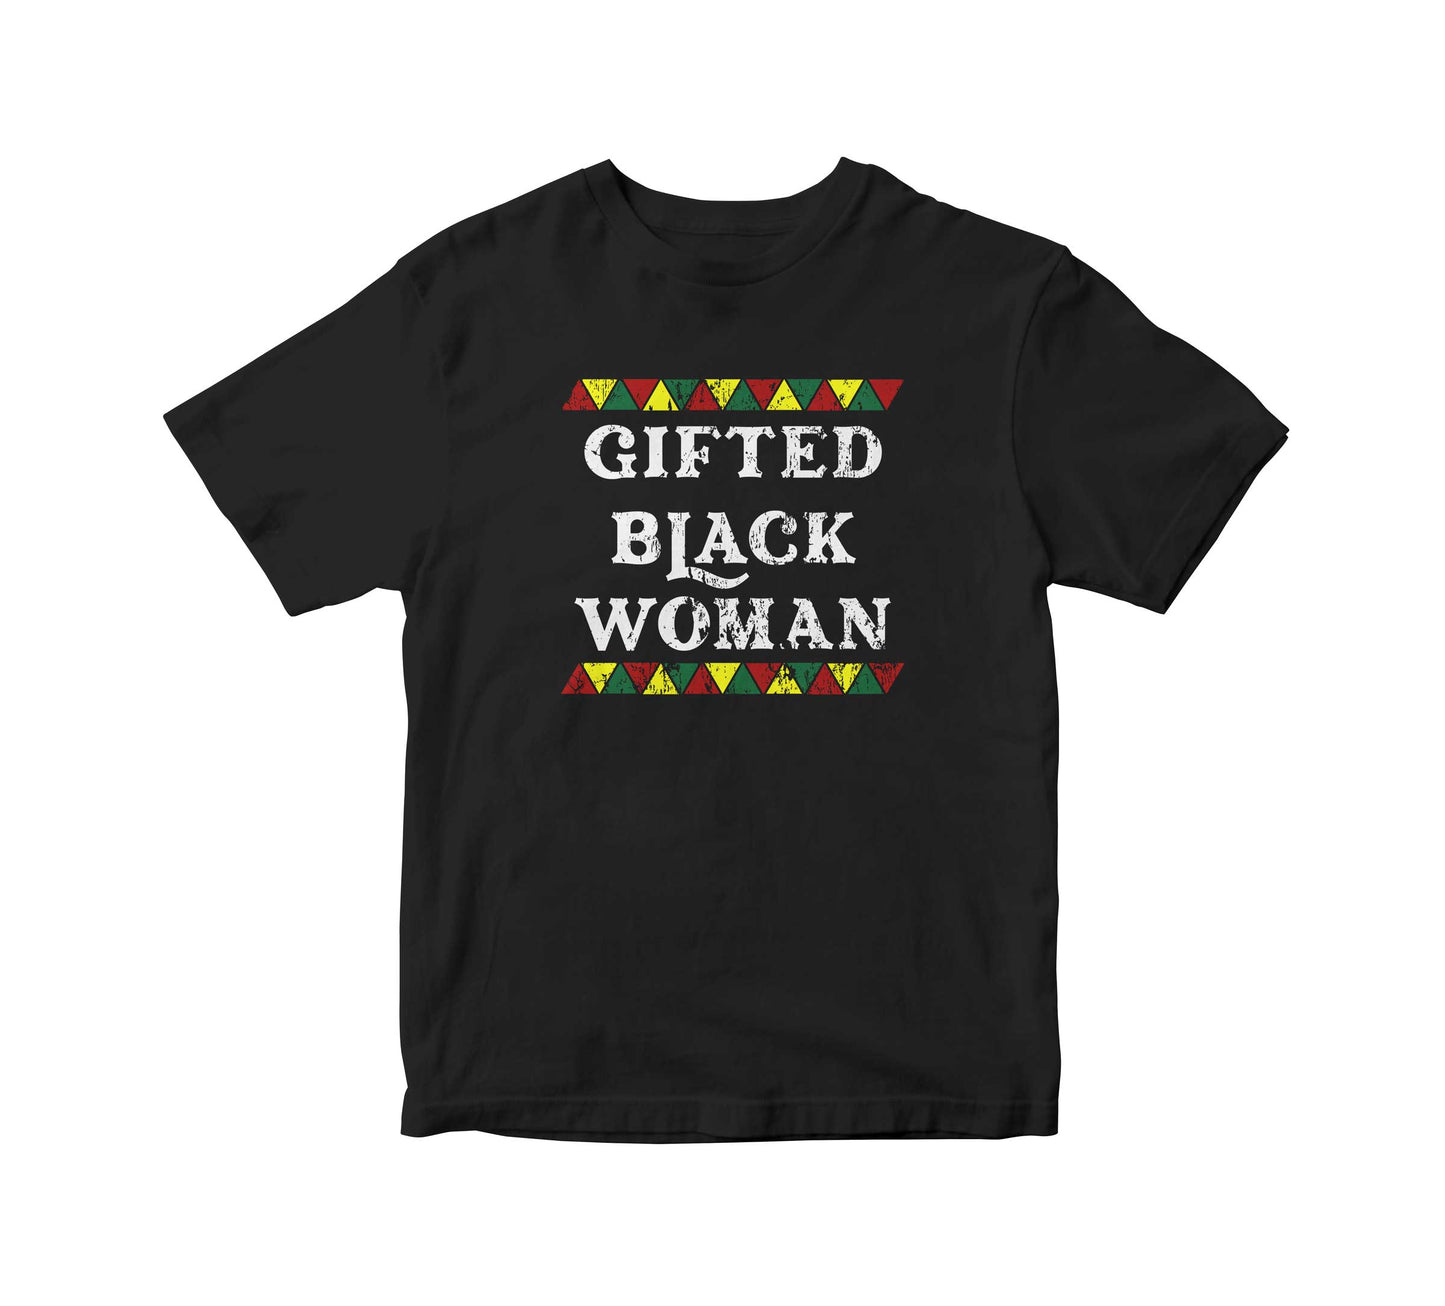 Gifted Black Woman Adult Unisex T-Shirt